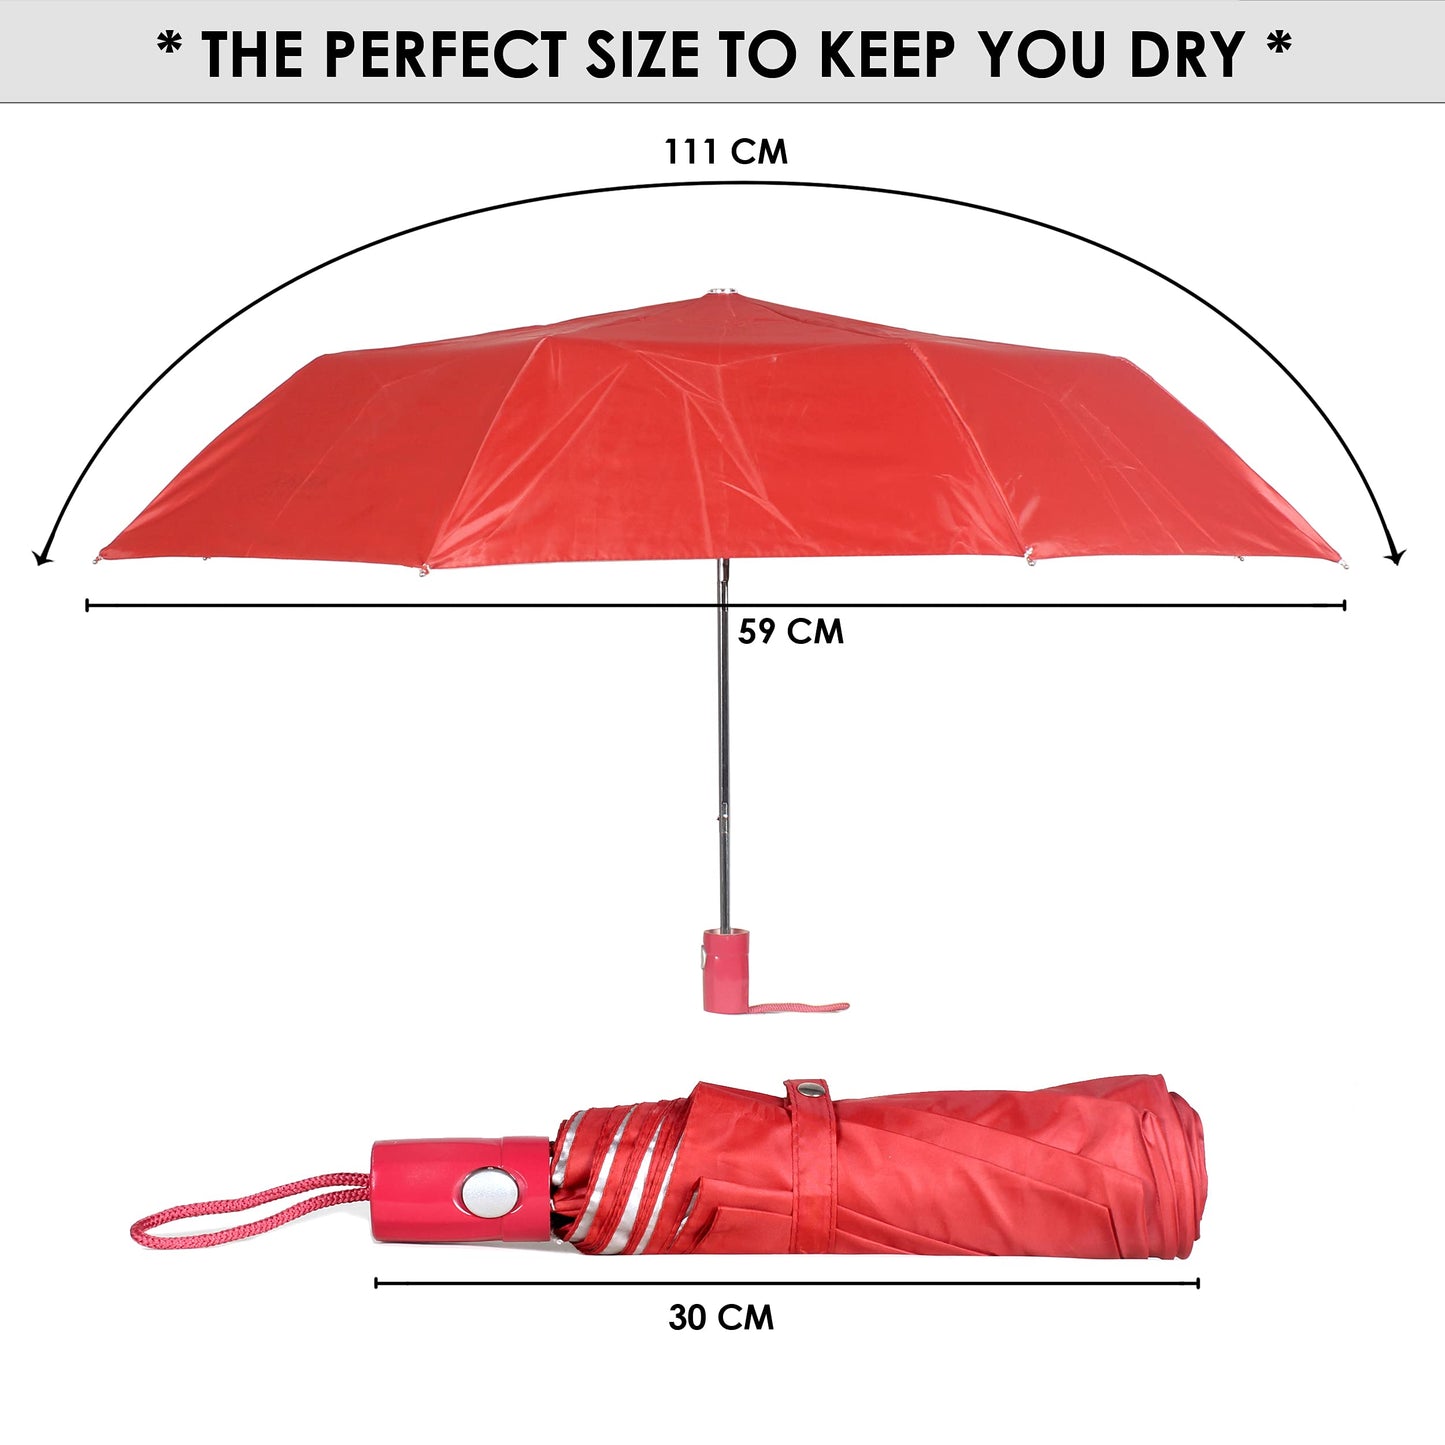 THE CLOWNFISH Umbrella 3 Fold Auto Open Waterproof 190 T Polyester Double Coated Silver Lined Umbrellas For Men and Women (Dark Orange)